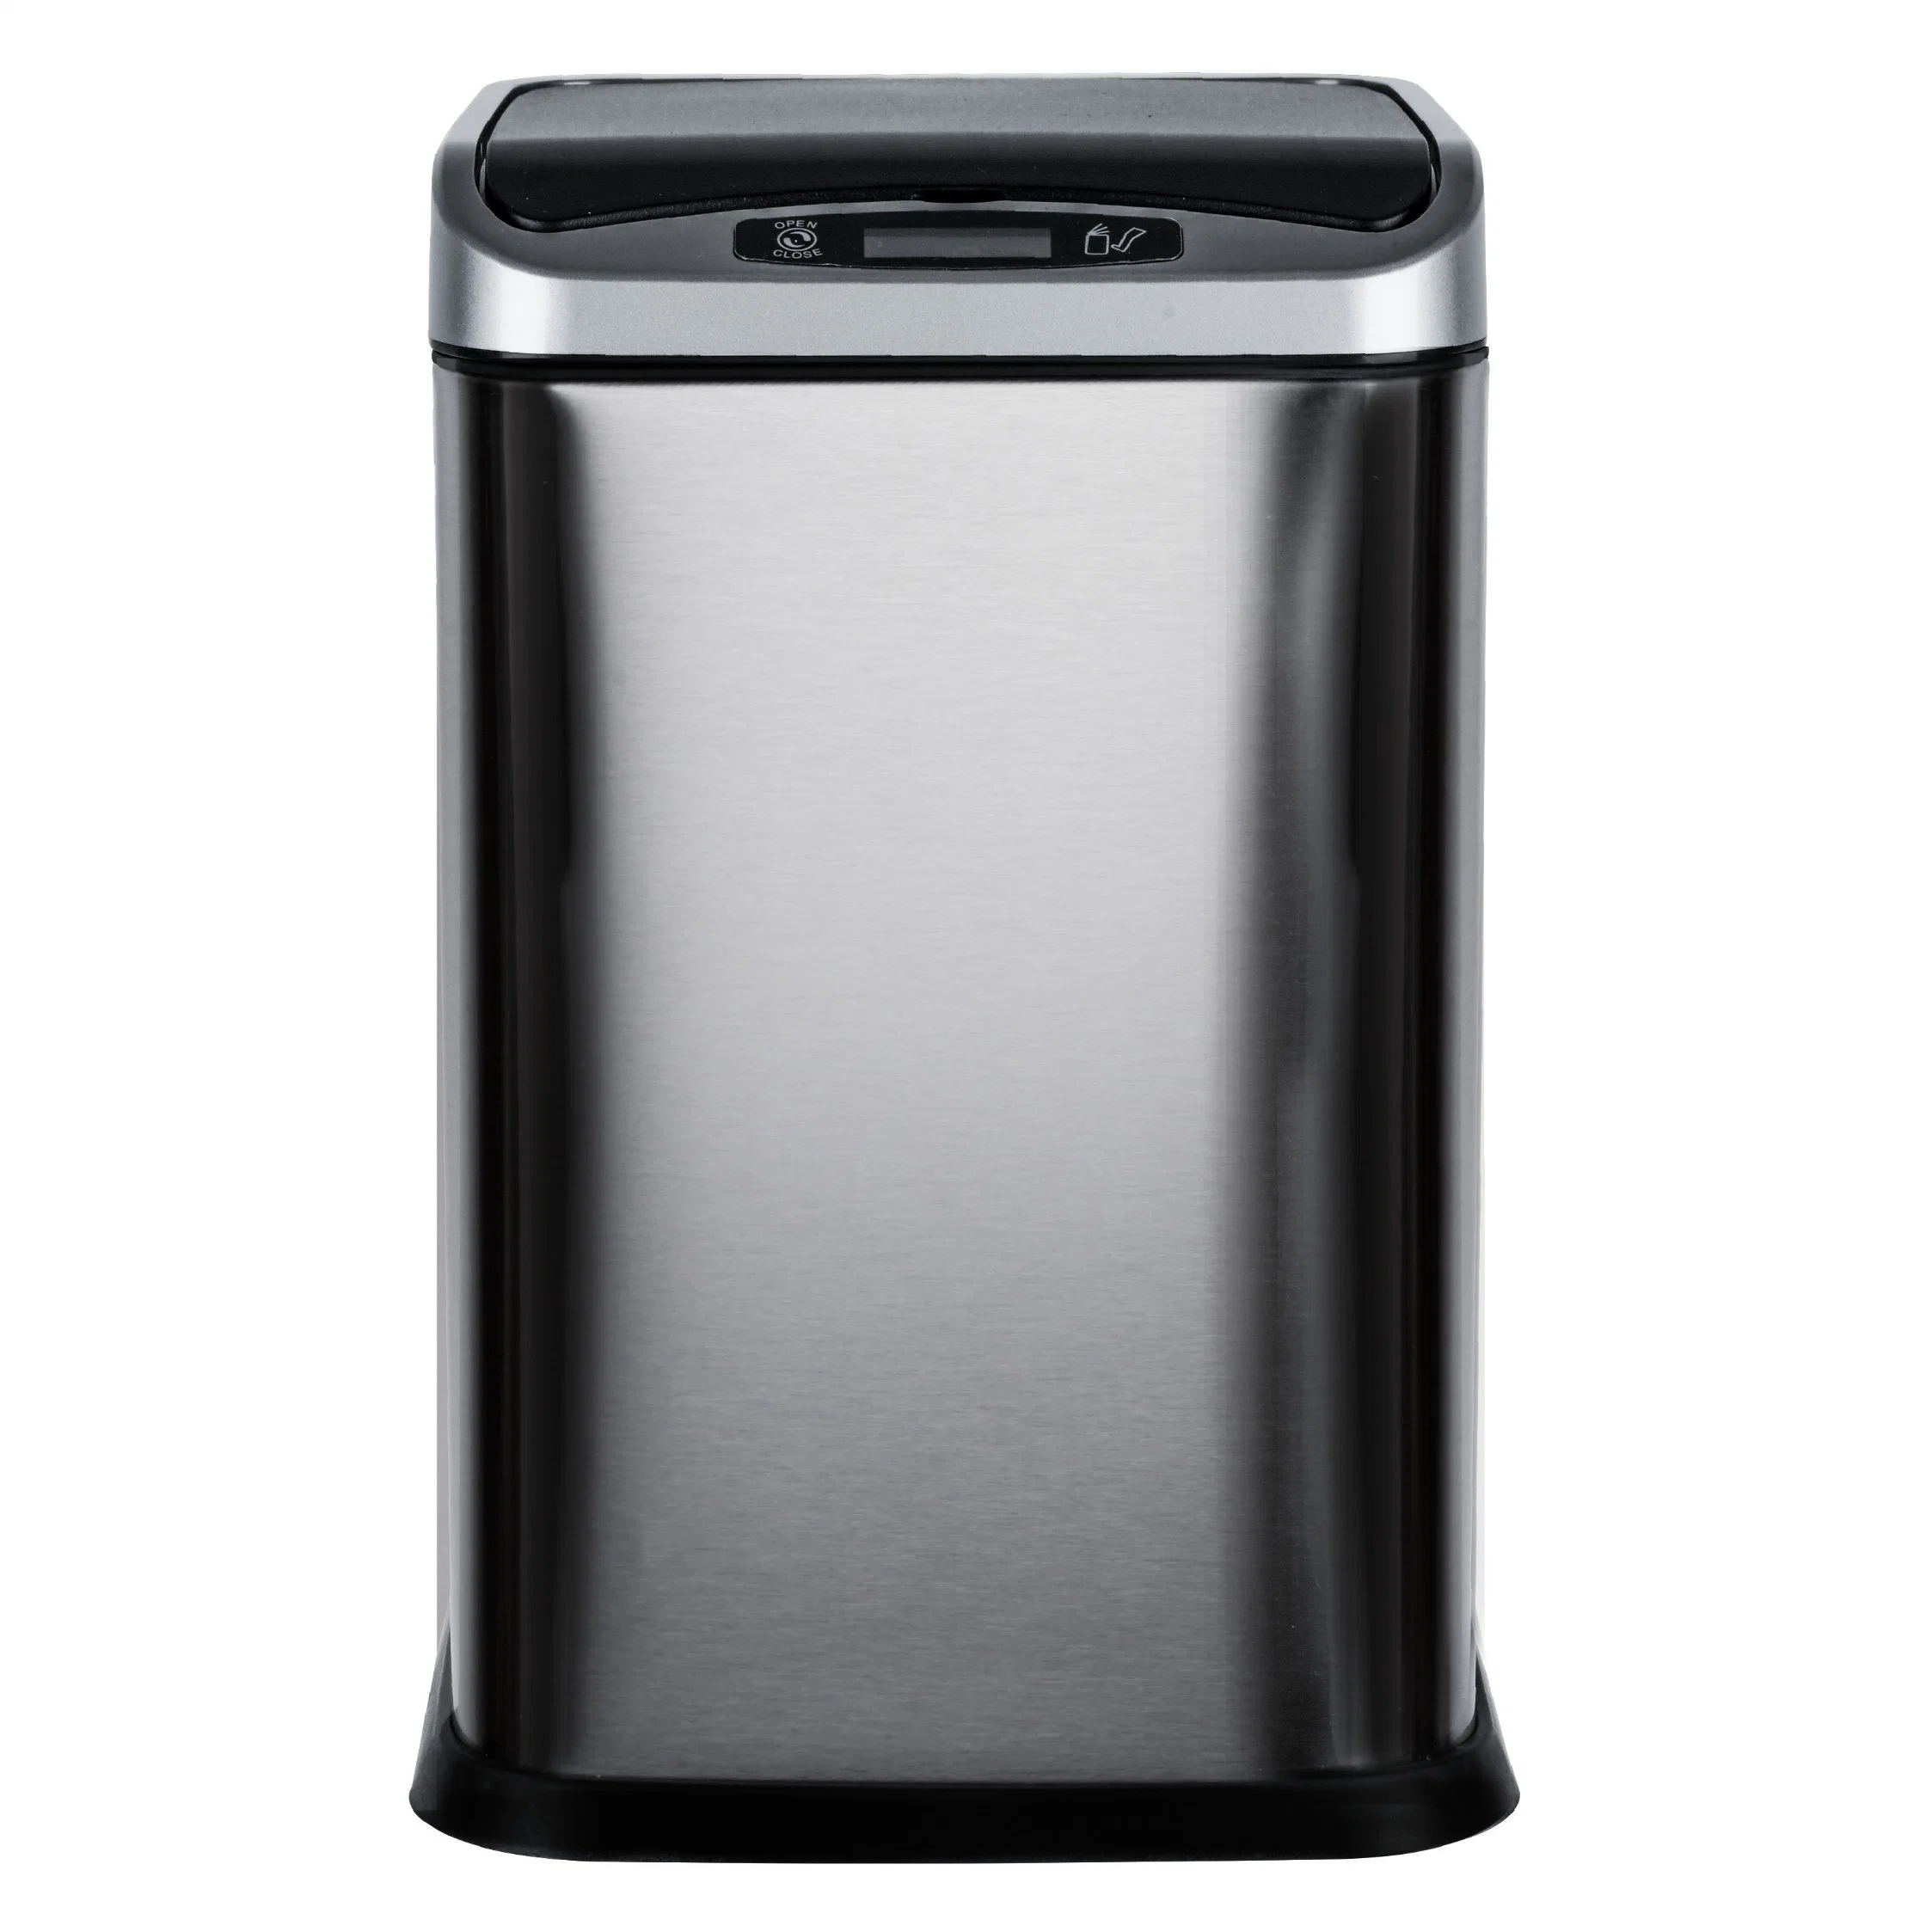 Recycling Yunzhe 1PC/Polybag/Shaped Foam/Mail Box Smart Large Sensor Dustbin Stainless